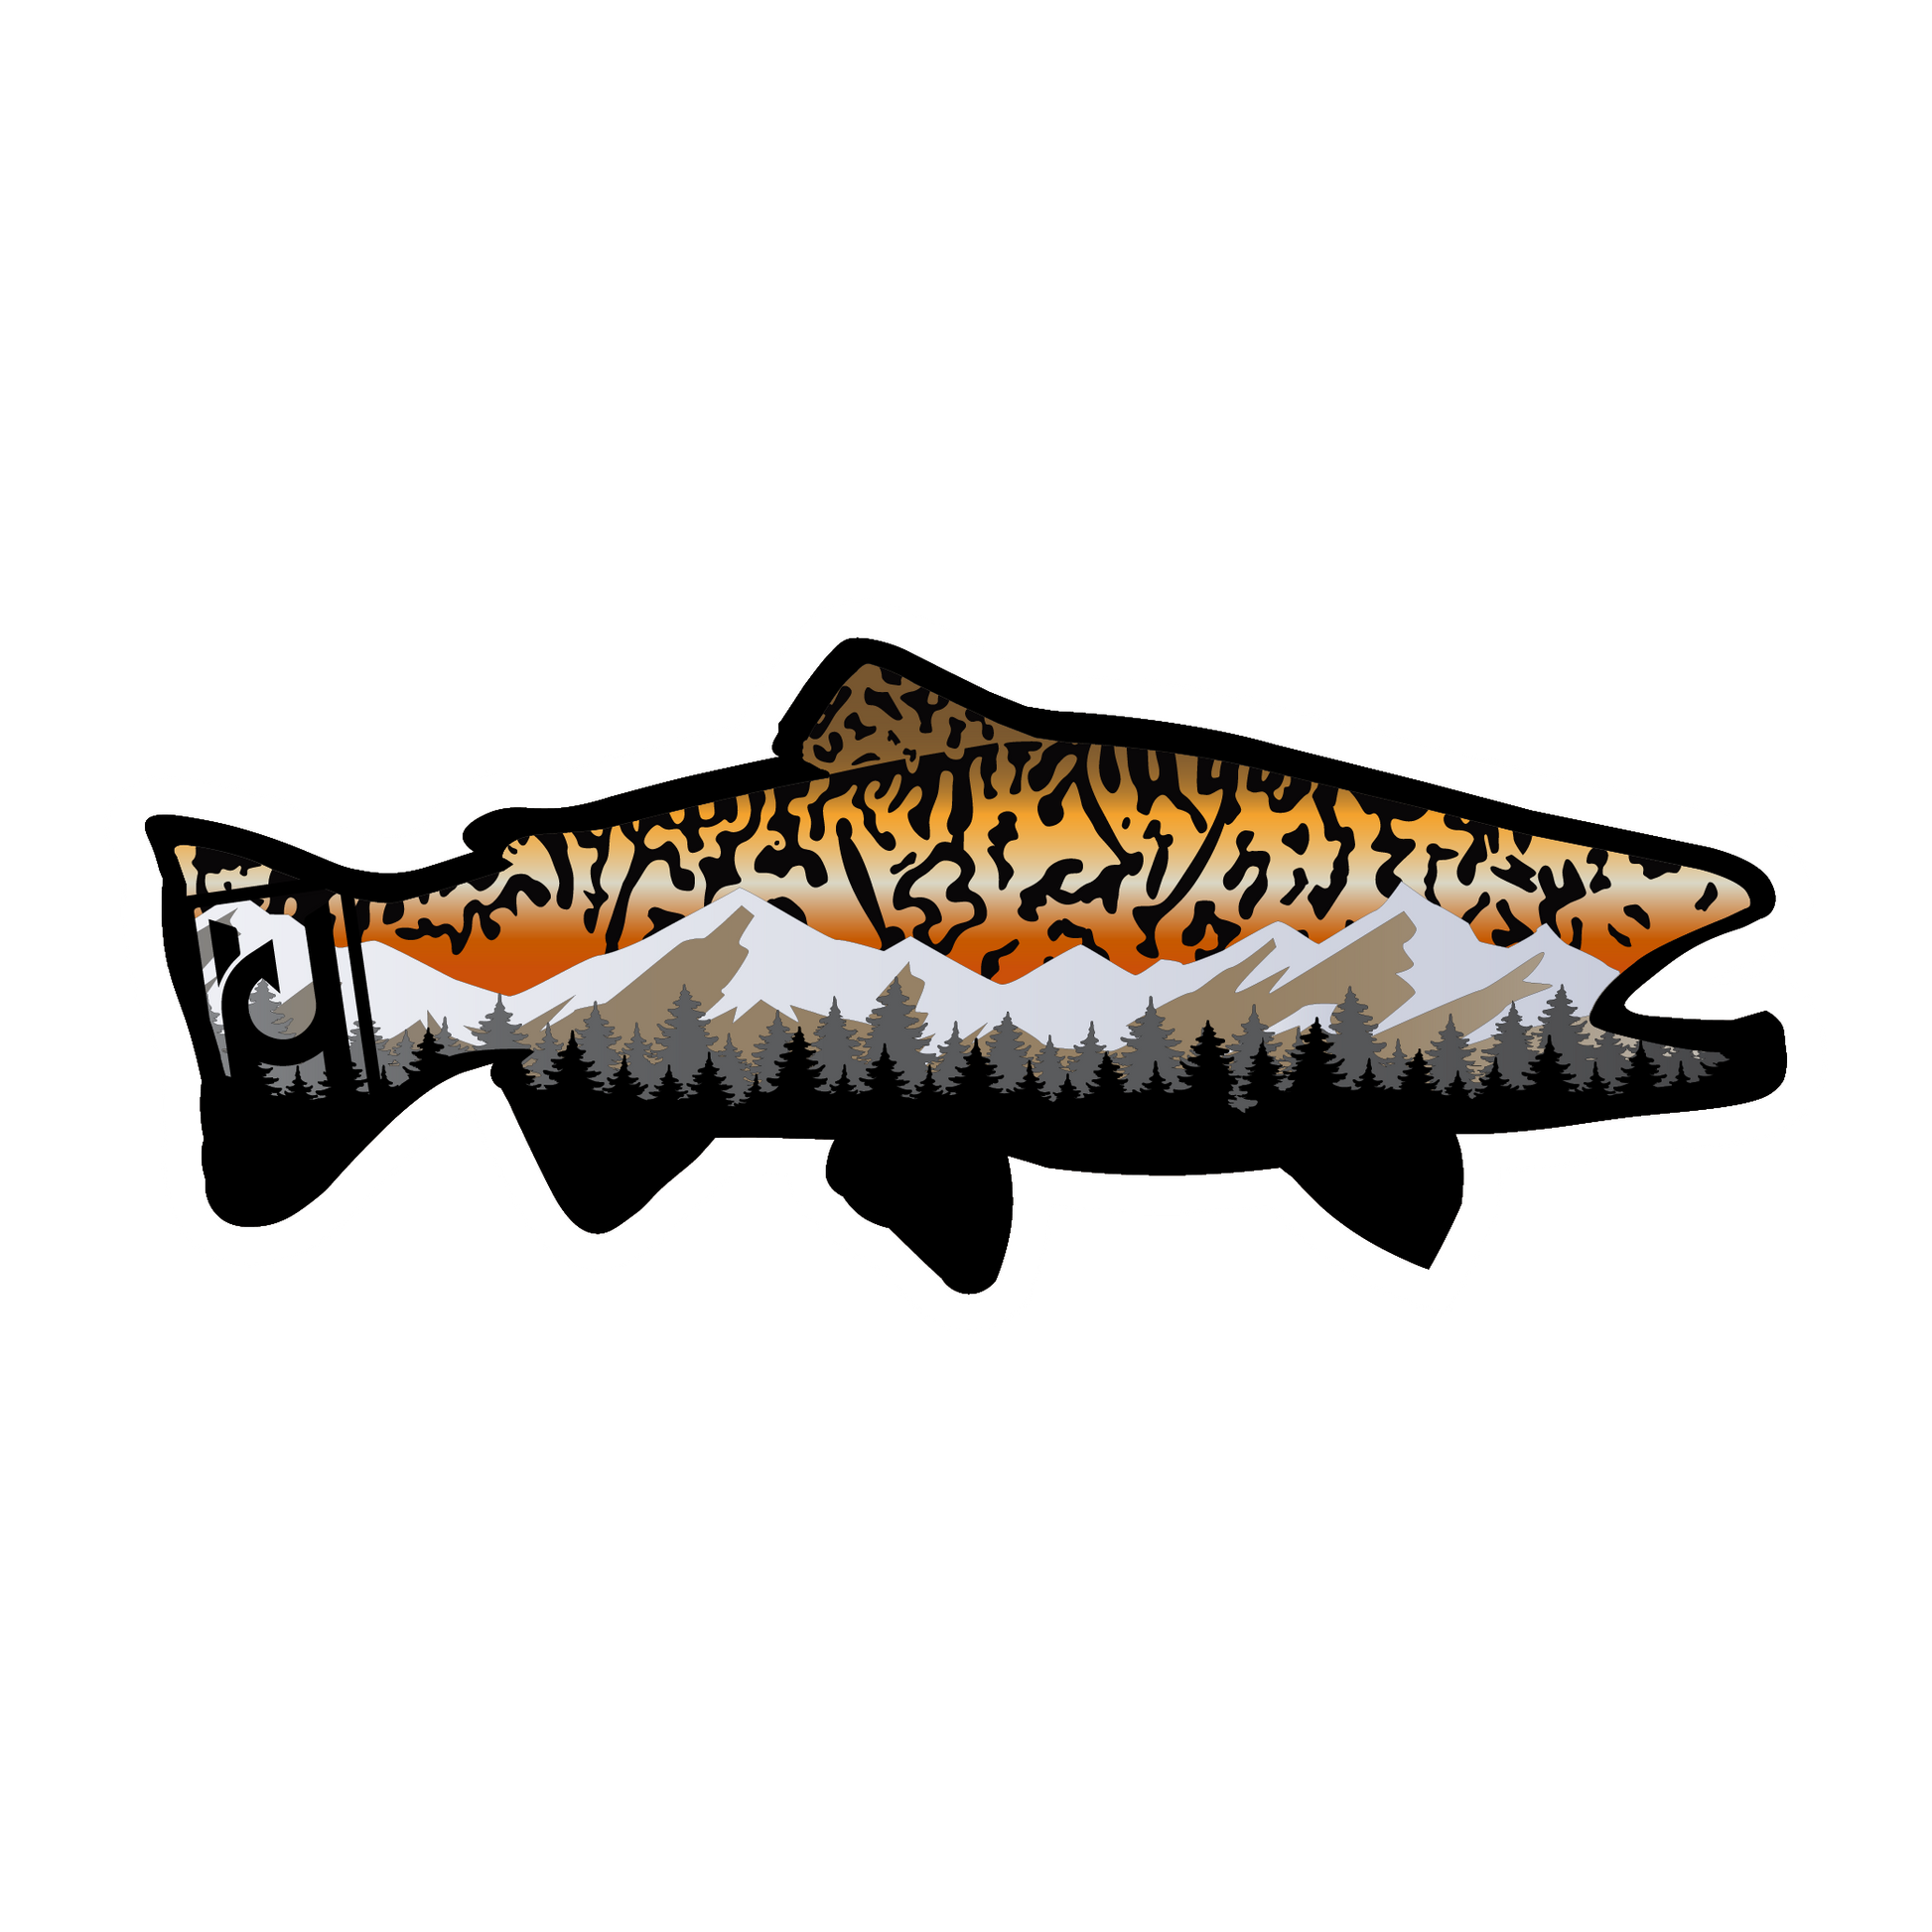 Trout Fishing Car Decals Trout Fishing Bumper Stickers Cool Vinyl Fridge  Sticker for Baby Back Clean Automotive Atickers